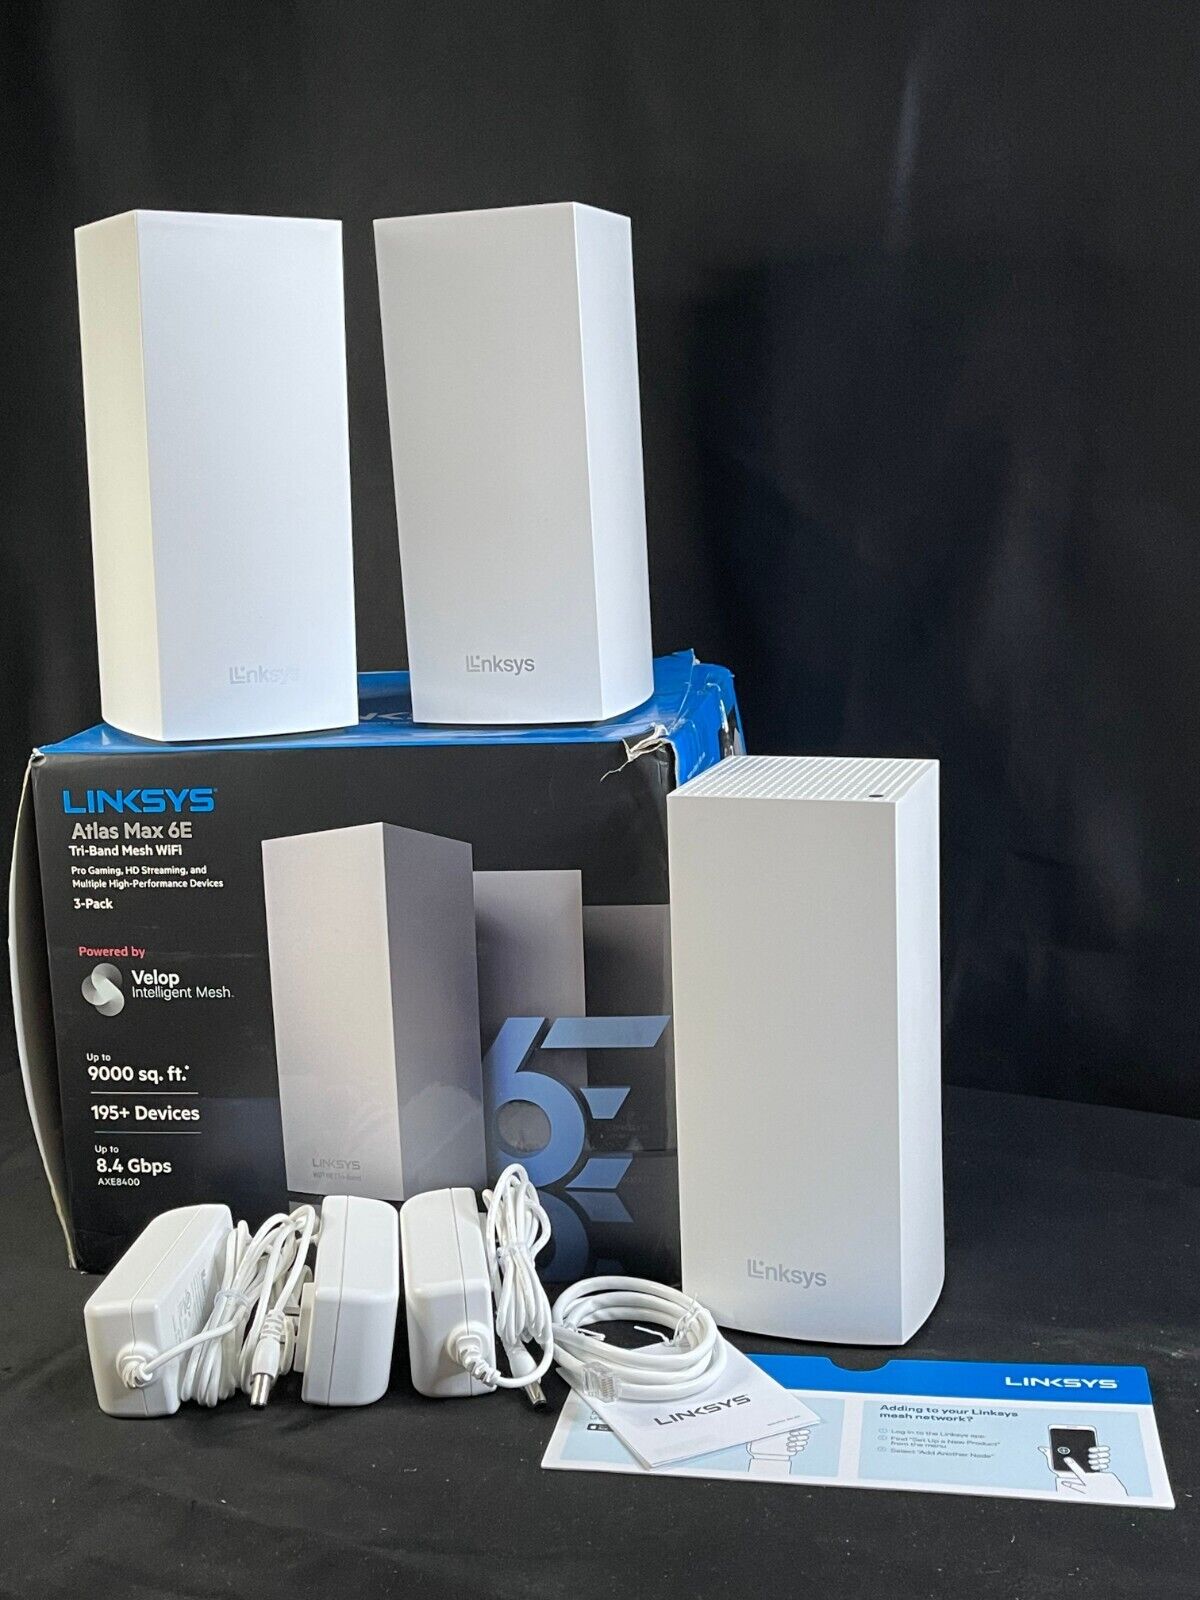 Linksys Atlas Max 6E MX8500 White Tri Band Mesh WiFi Router System 3 Pack